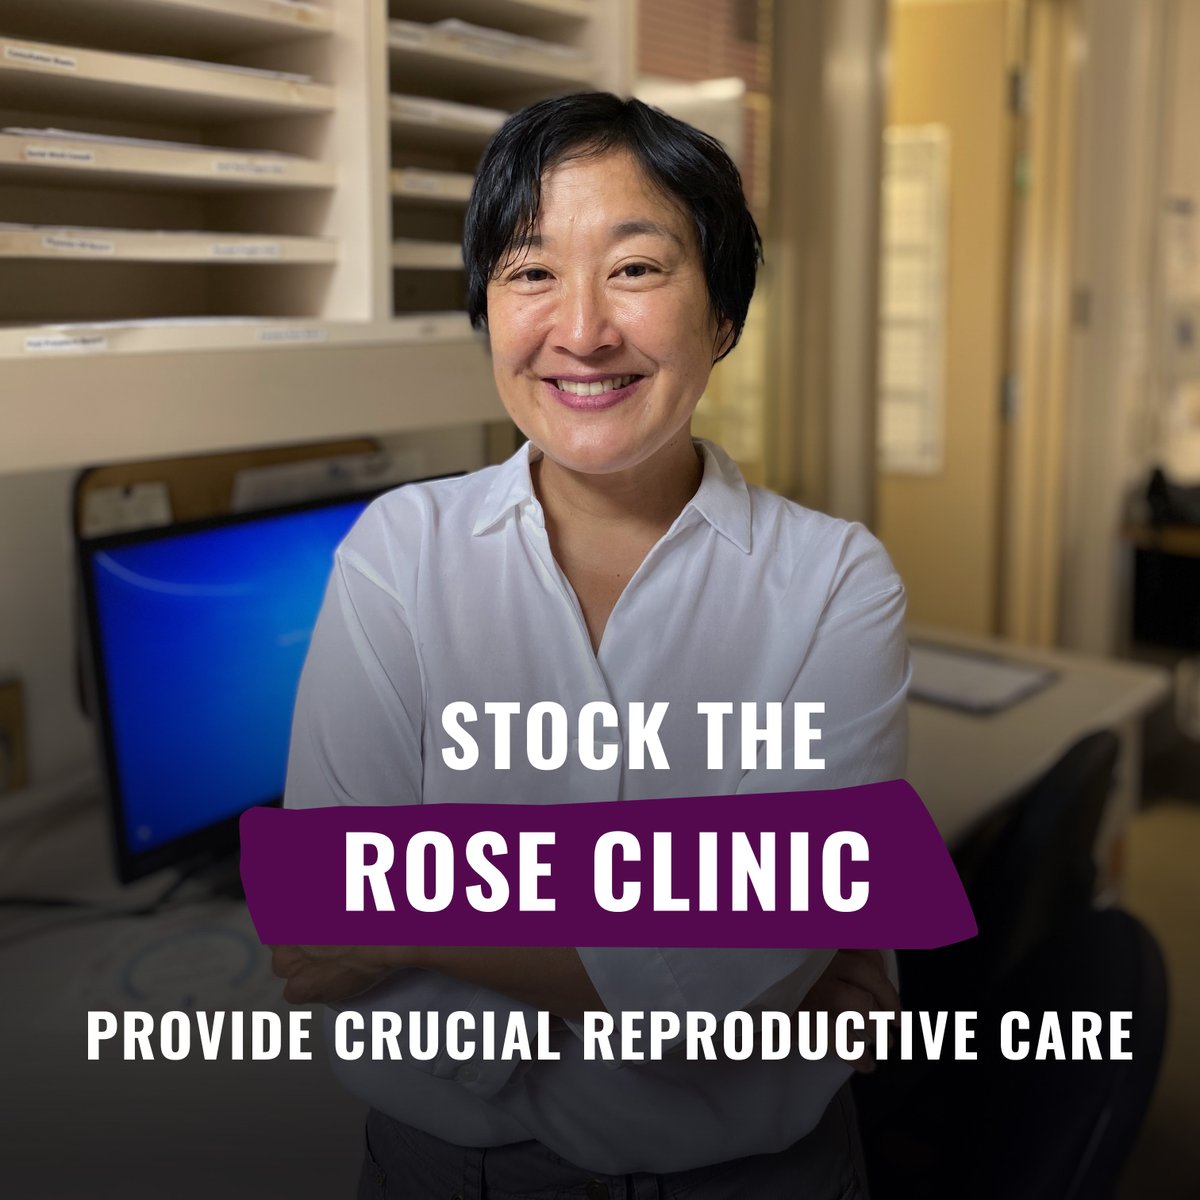 On February 29, the Government of Canada announced steps towards universal coverage for contraception. Until this becomes a reality, the QEII's ROSE Clinic has an urgent need for donor funding to provide crucial reproductive care to patients. 💜 Donate: bit.ly/3uQWosO